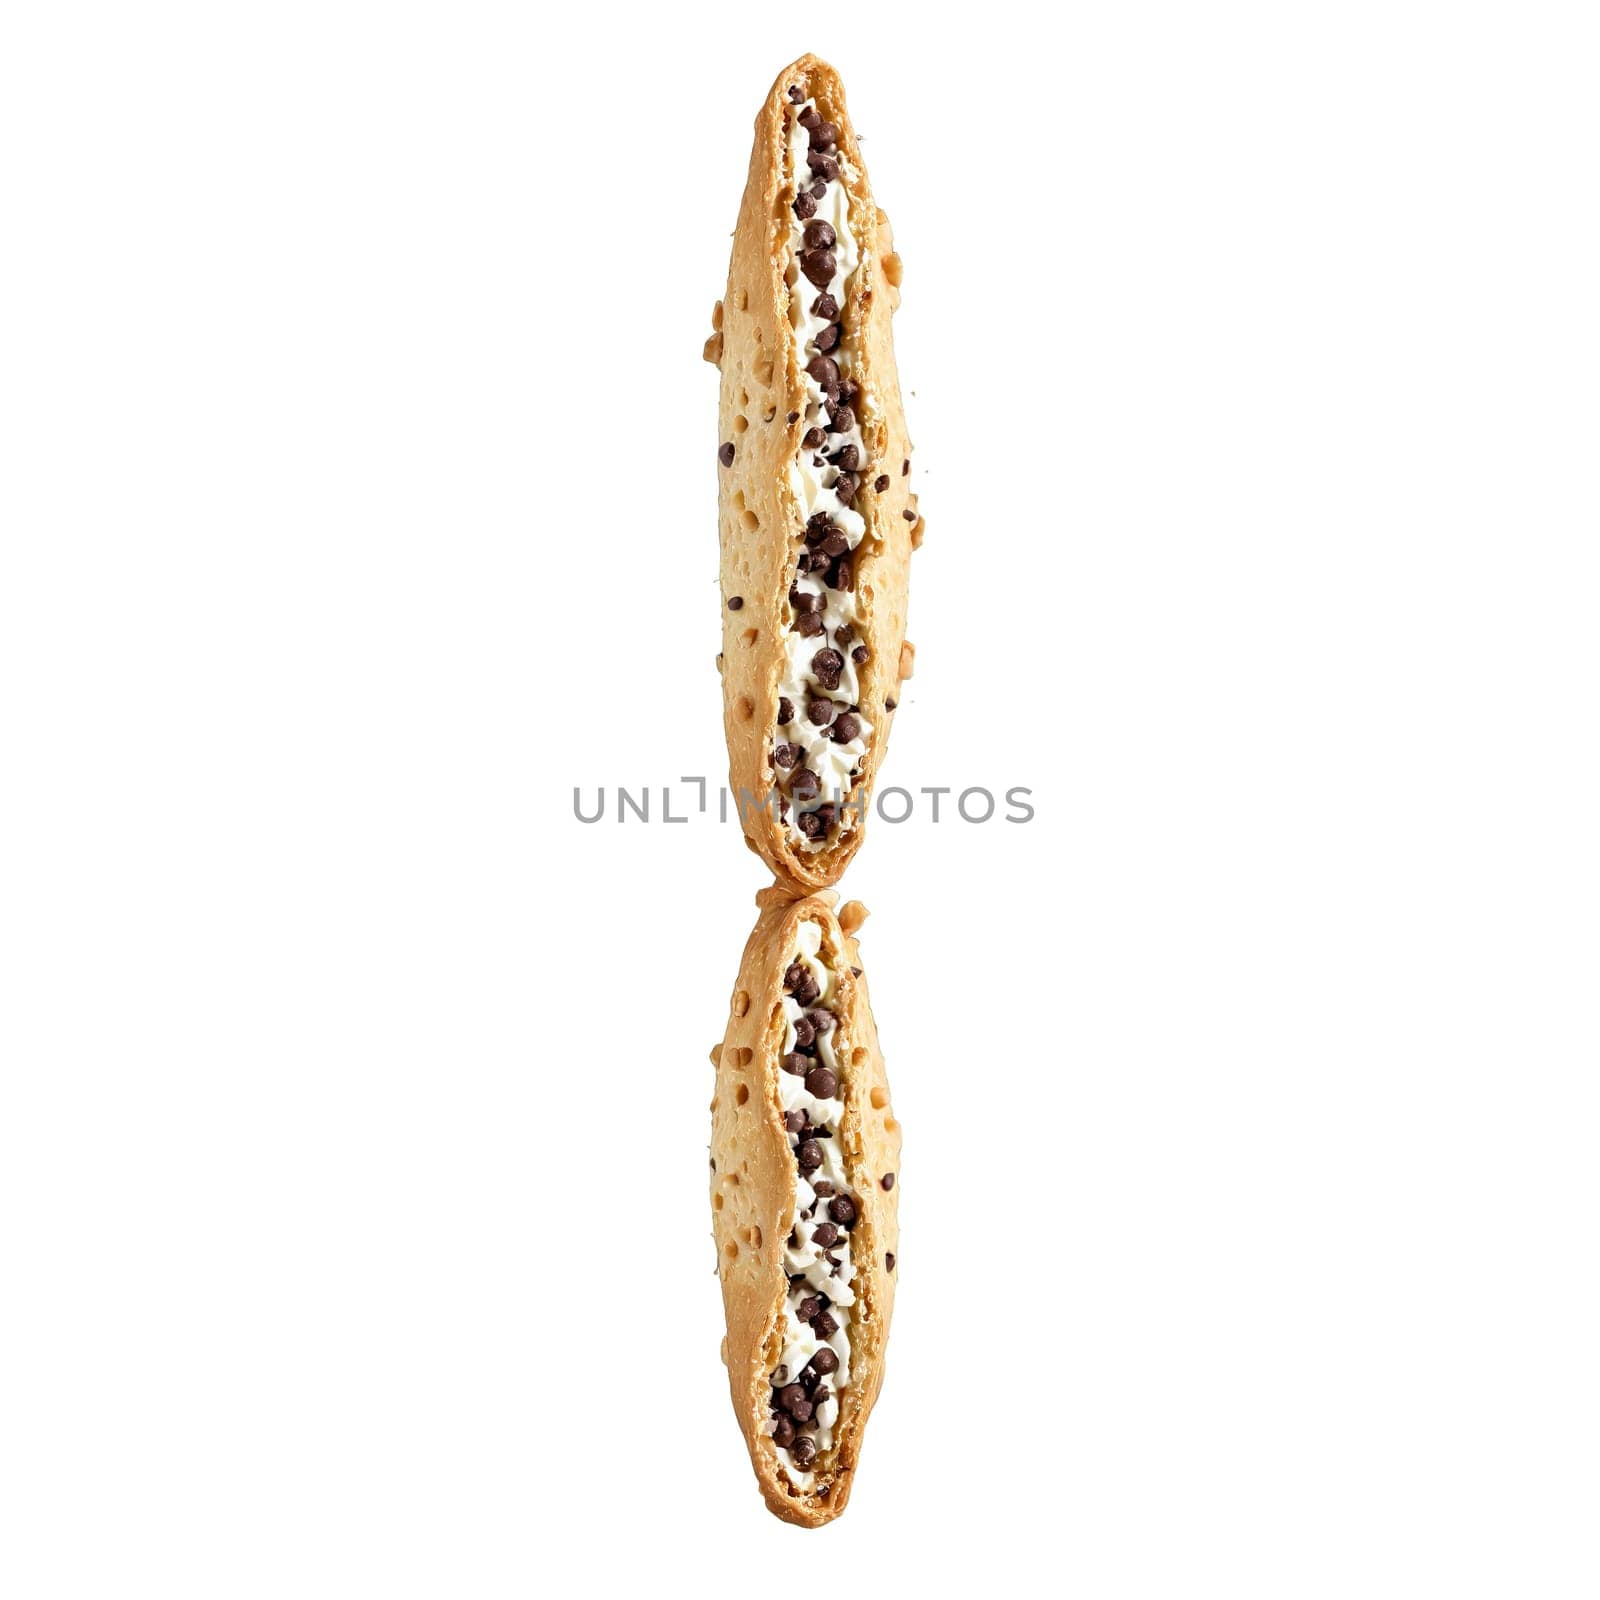 Cannoli with ricotta filling and chocolate chip ends in motion Food and culinary concept. Food isolated on transparent background.